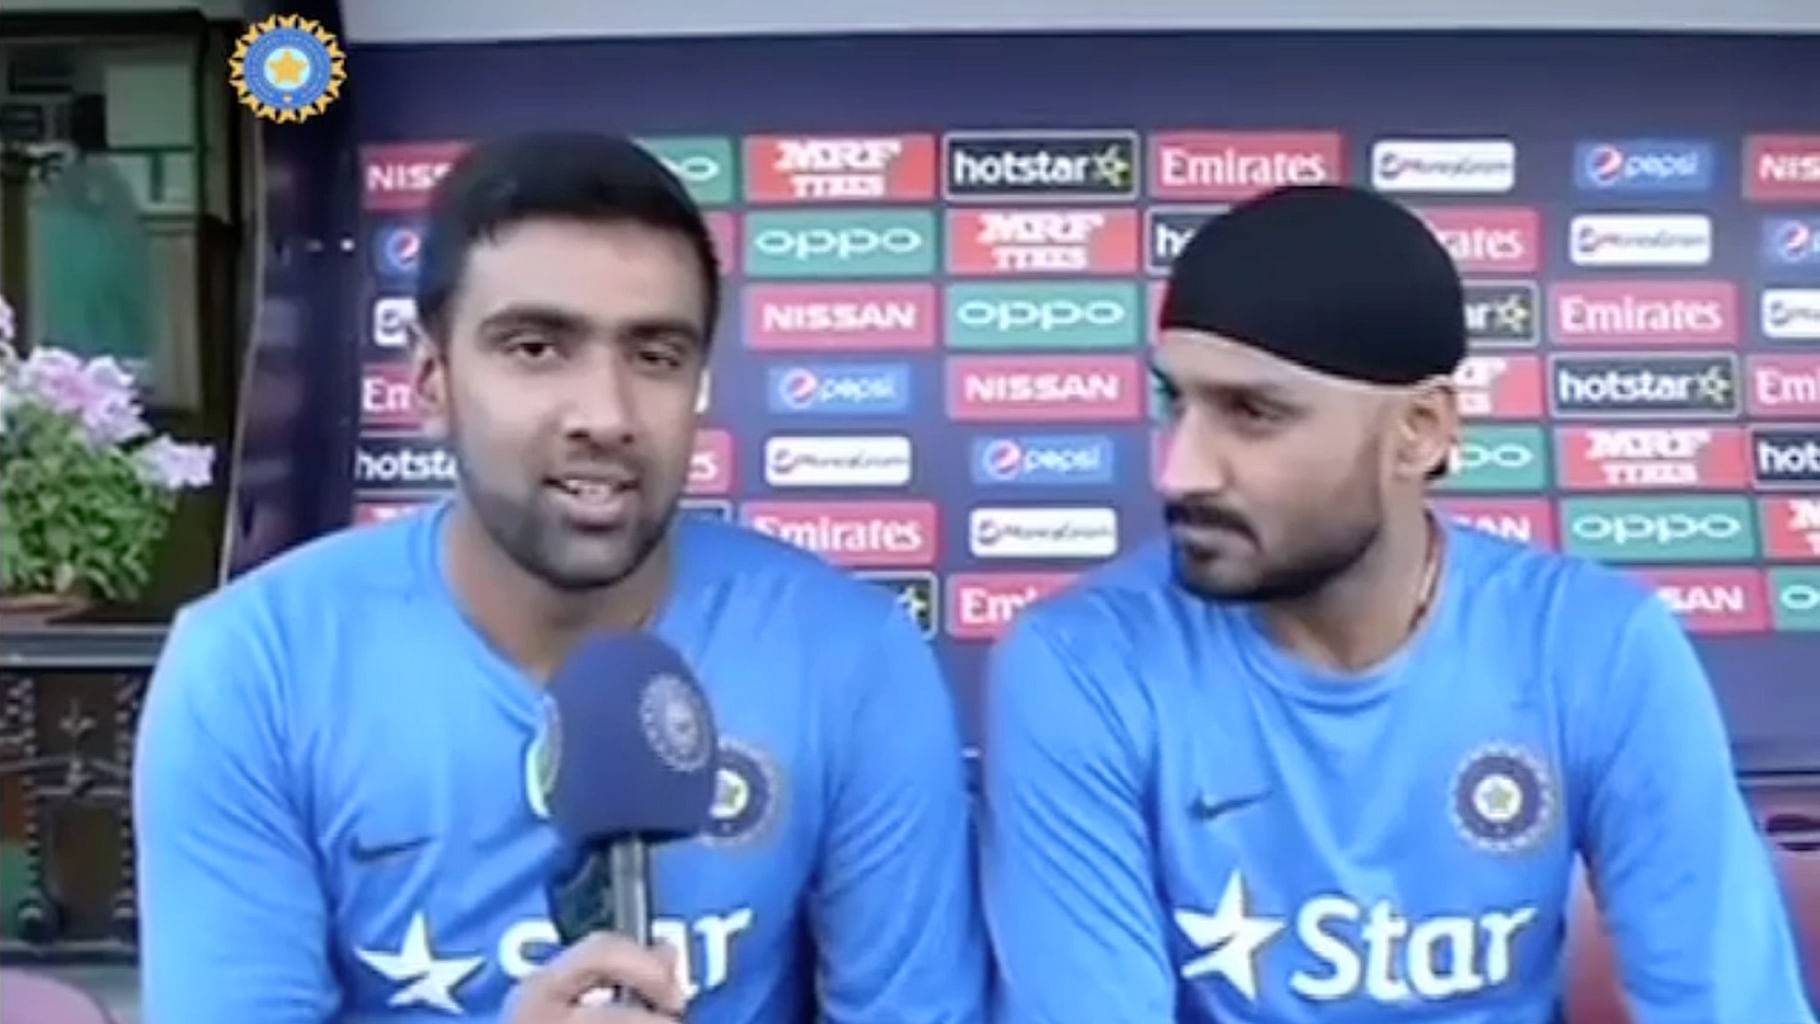 Harbhajan and Ashwin have a little fun off the pitch. (Photo Courtesy: Screenshot <a href="https://twitter.com/BCCI/status/715161791039320064">BCCI Twitter Handle</a>)